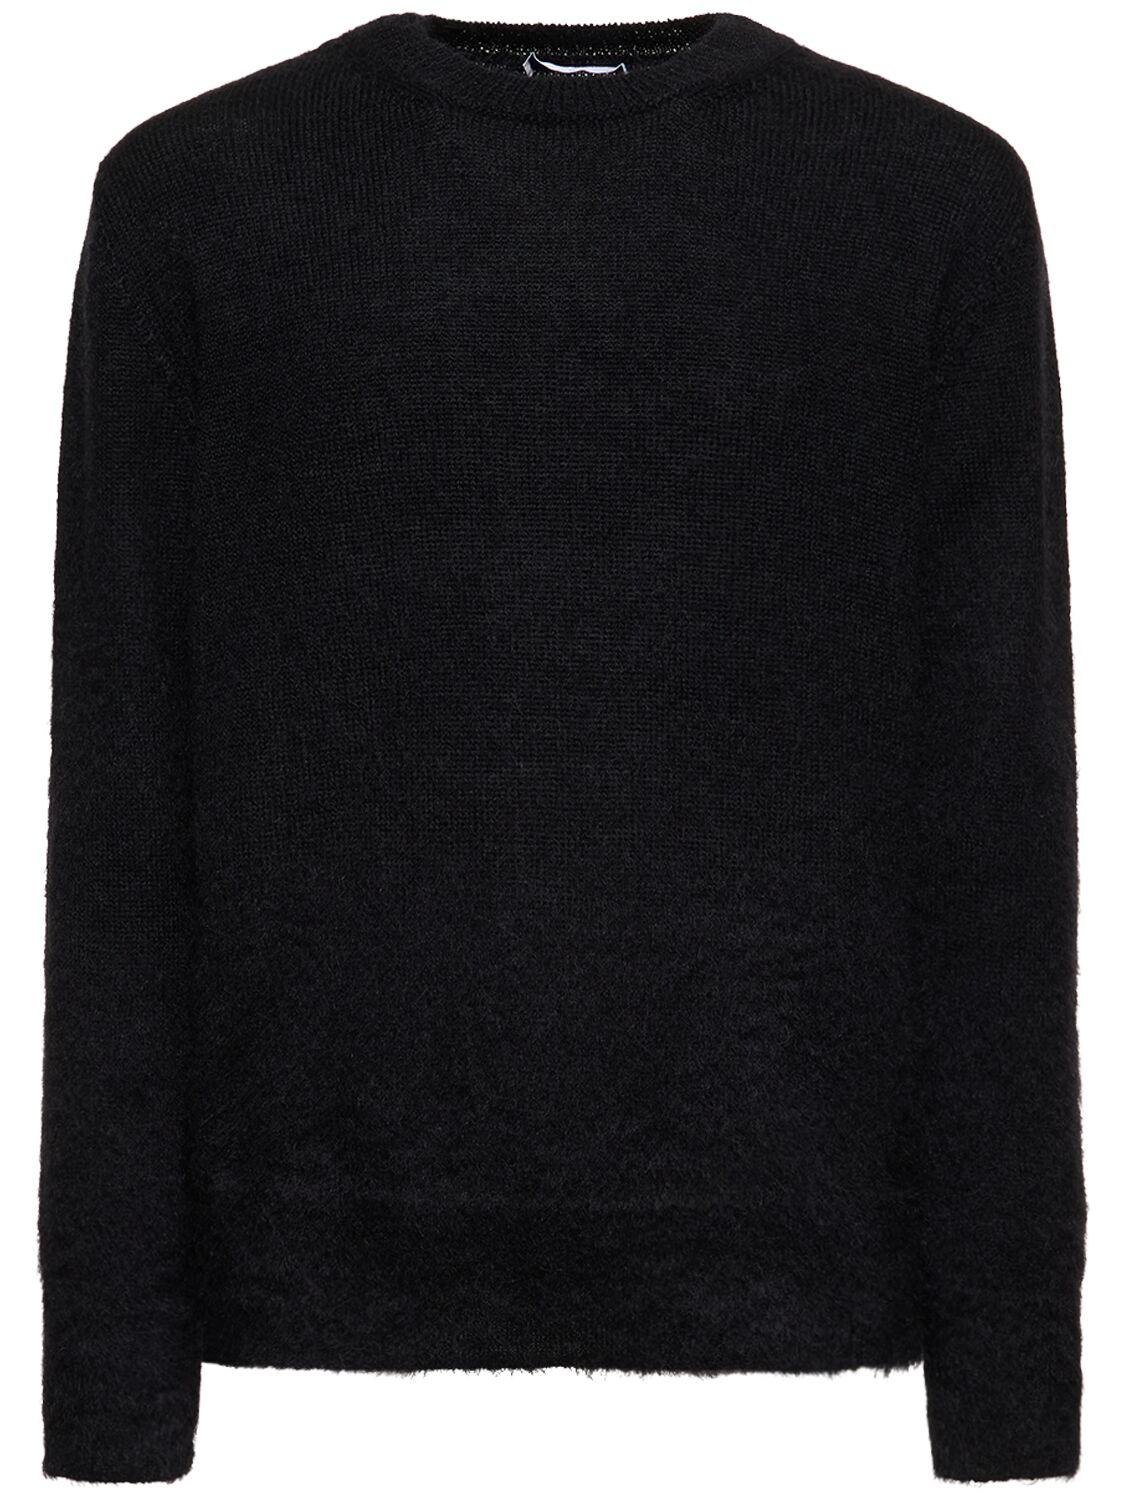 Image of Arrow Mohair Blend Knit Sweater